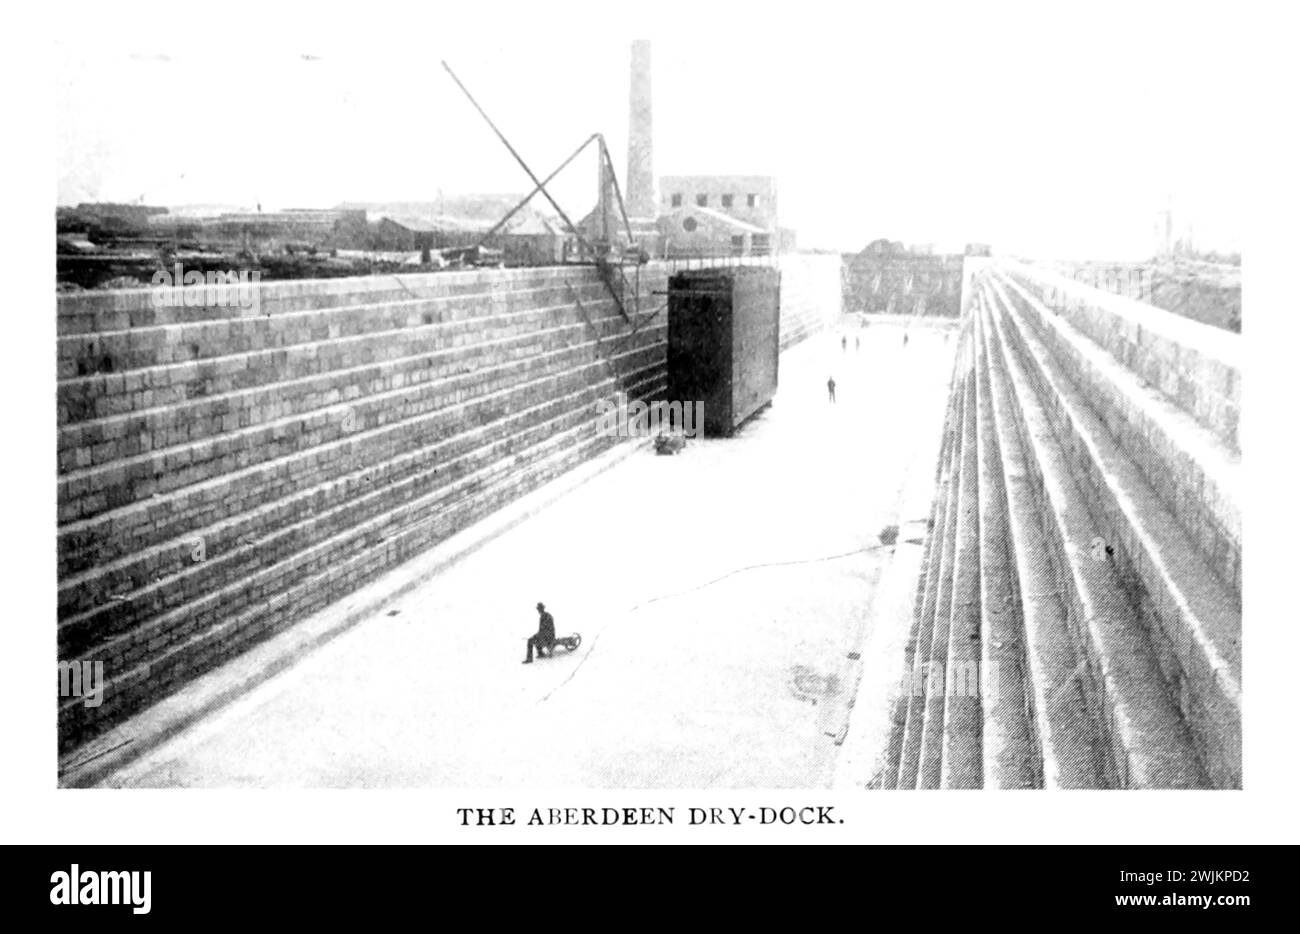 The ABERDEEN, Dry Dock from the Article MODERN WHARF IMPROVEMENTS AND HARBOR FACILITIES. Part III By Foster Crowell. from The Engineering Magazine Devoted to Industrial Progress Volume XIV October 1897 - March 1898 The Engineering Magazine Co Stock Photo